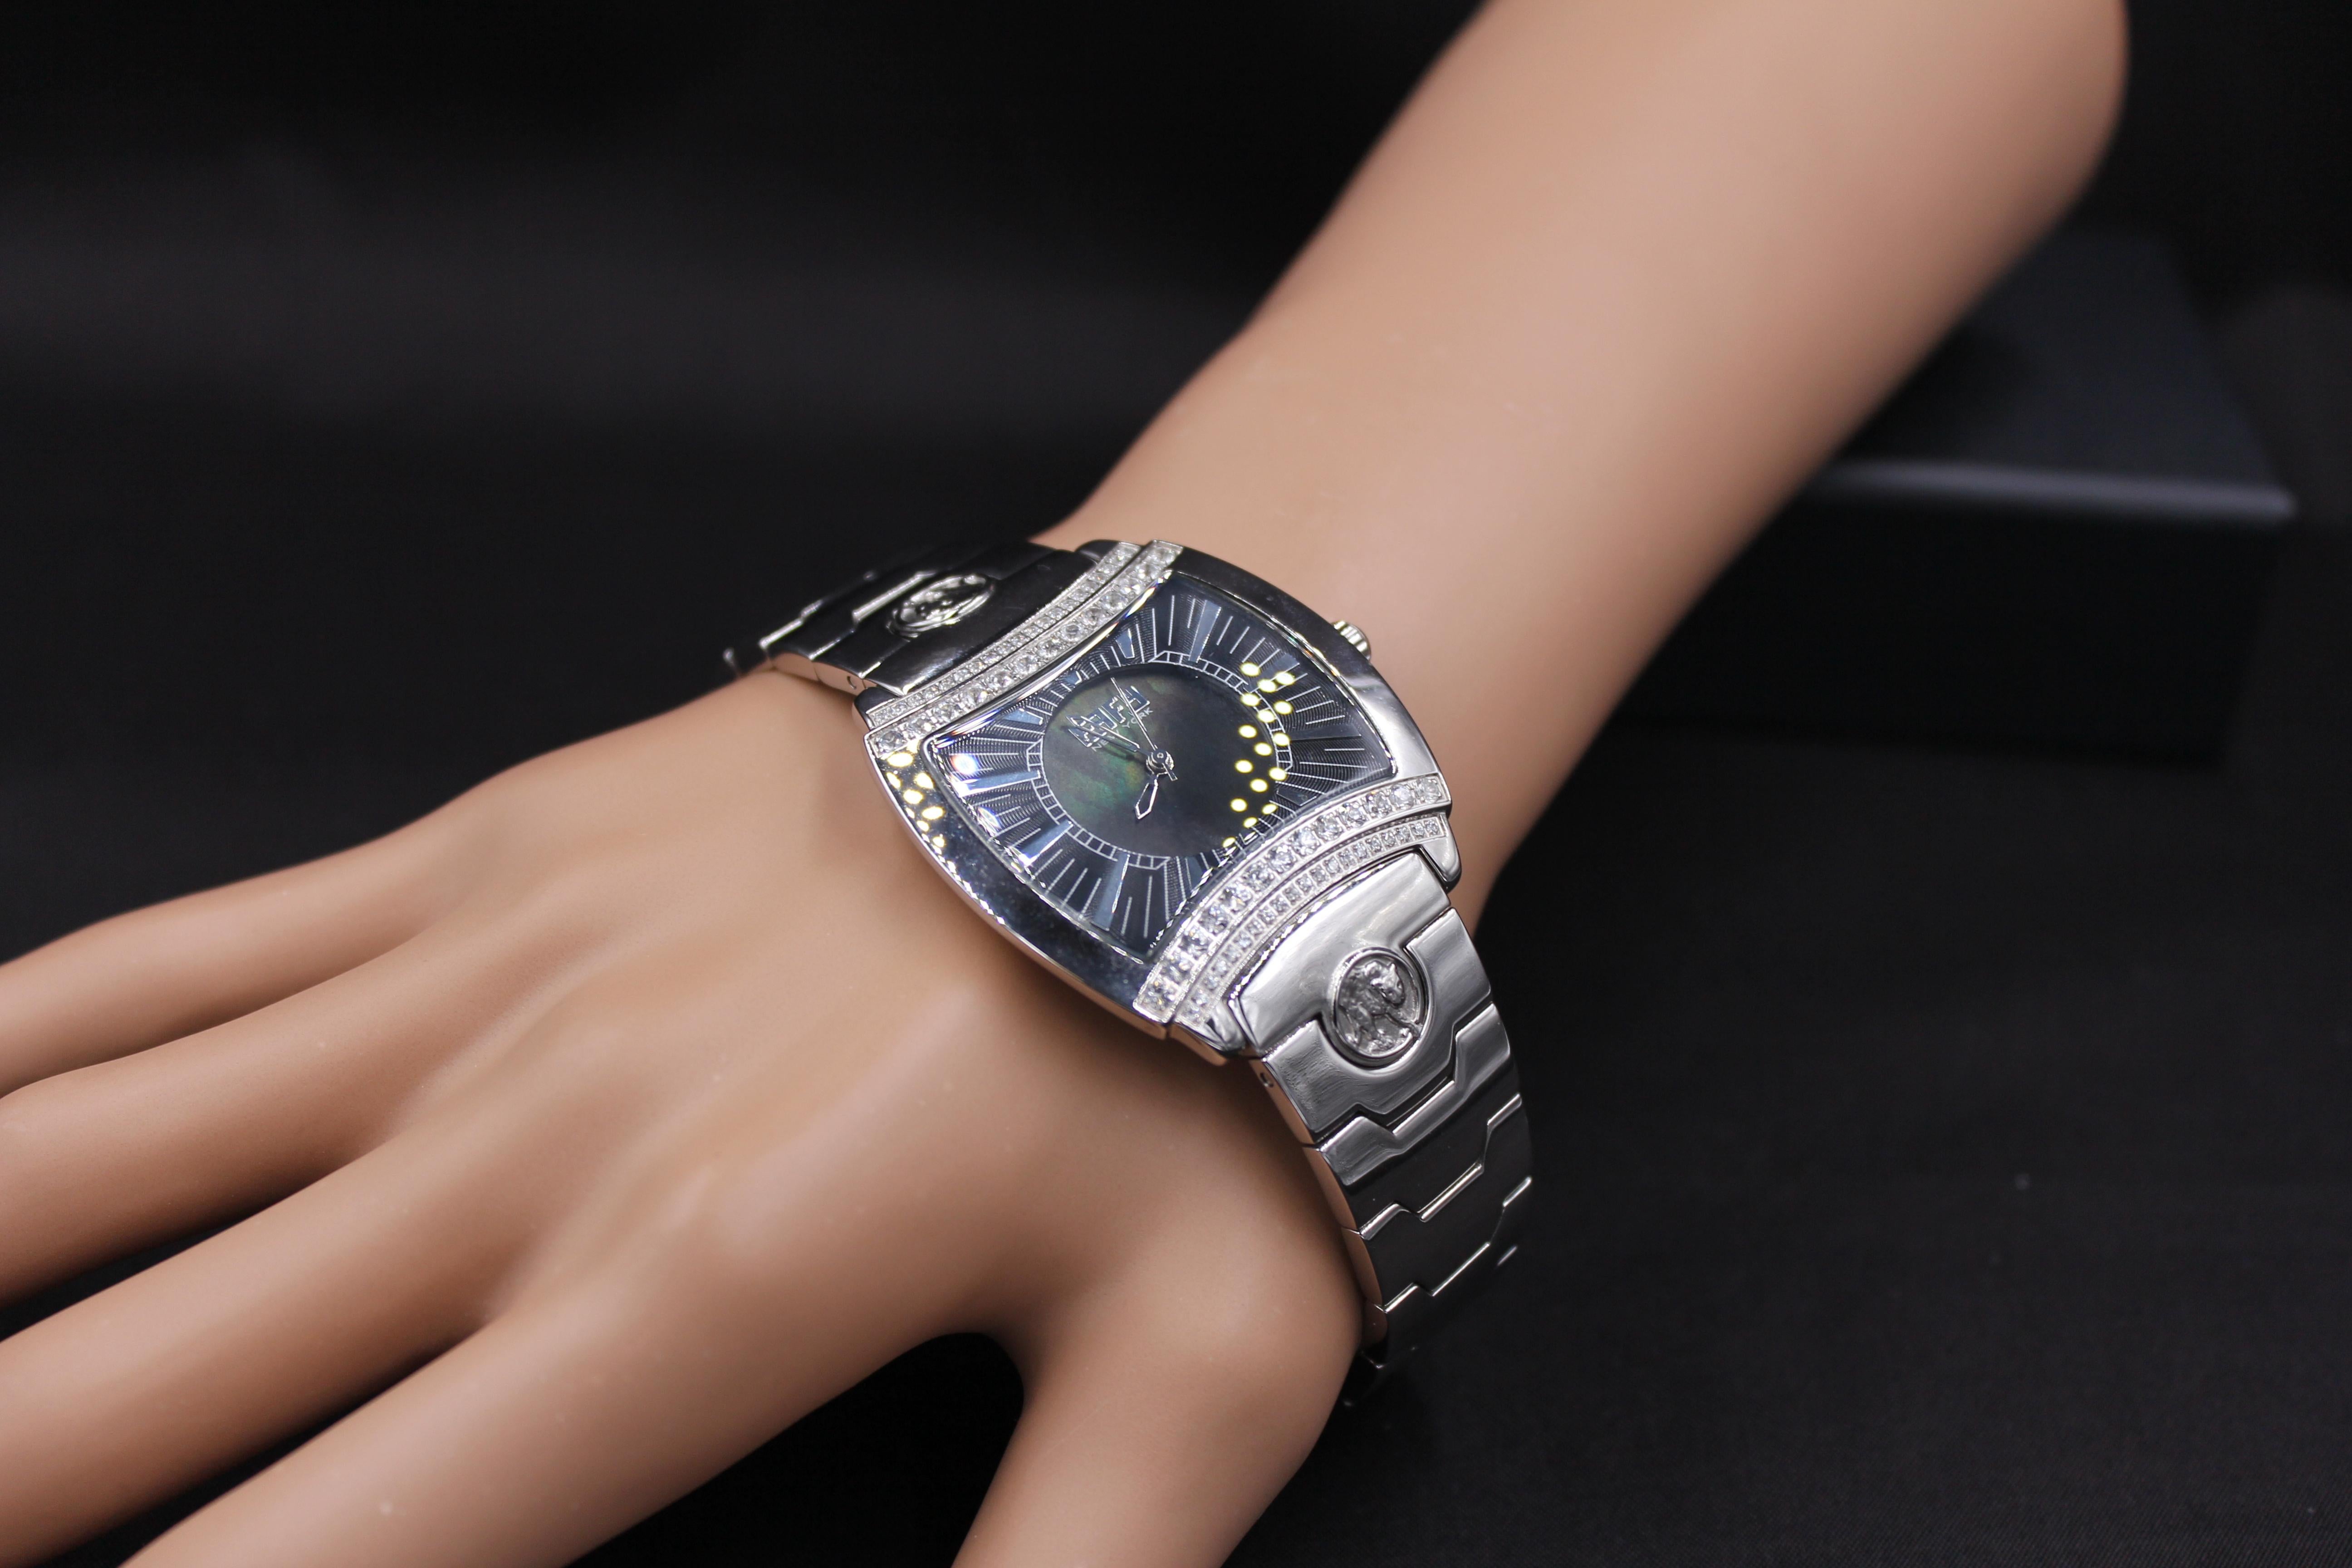 ·     Quality Swiss-Quartz movement guarantees precision timing
·         Mother-of-Pearl dial micro-paved with diamonds and gemstones enhances any dress style
·         Scratch-resistant sapphire glass lens
·         Genuine exotic stingray leather